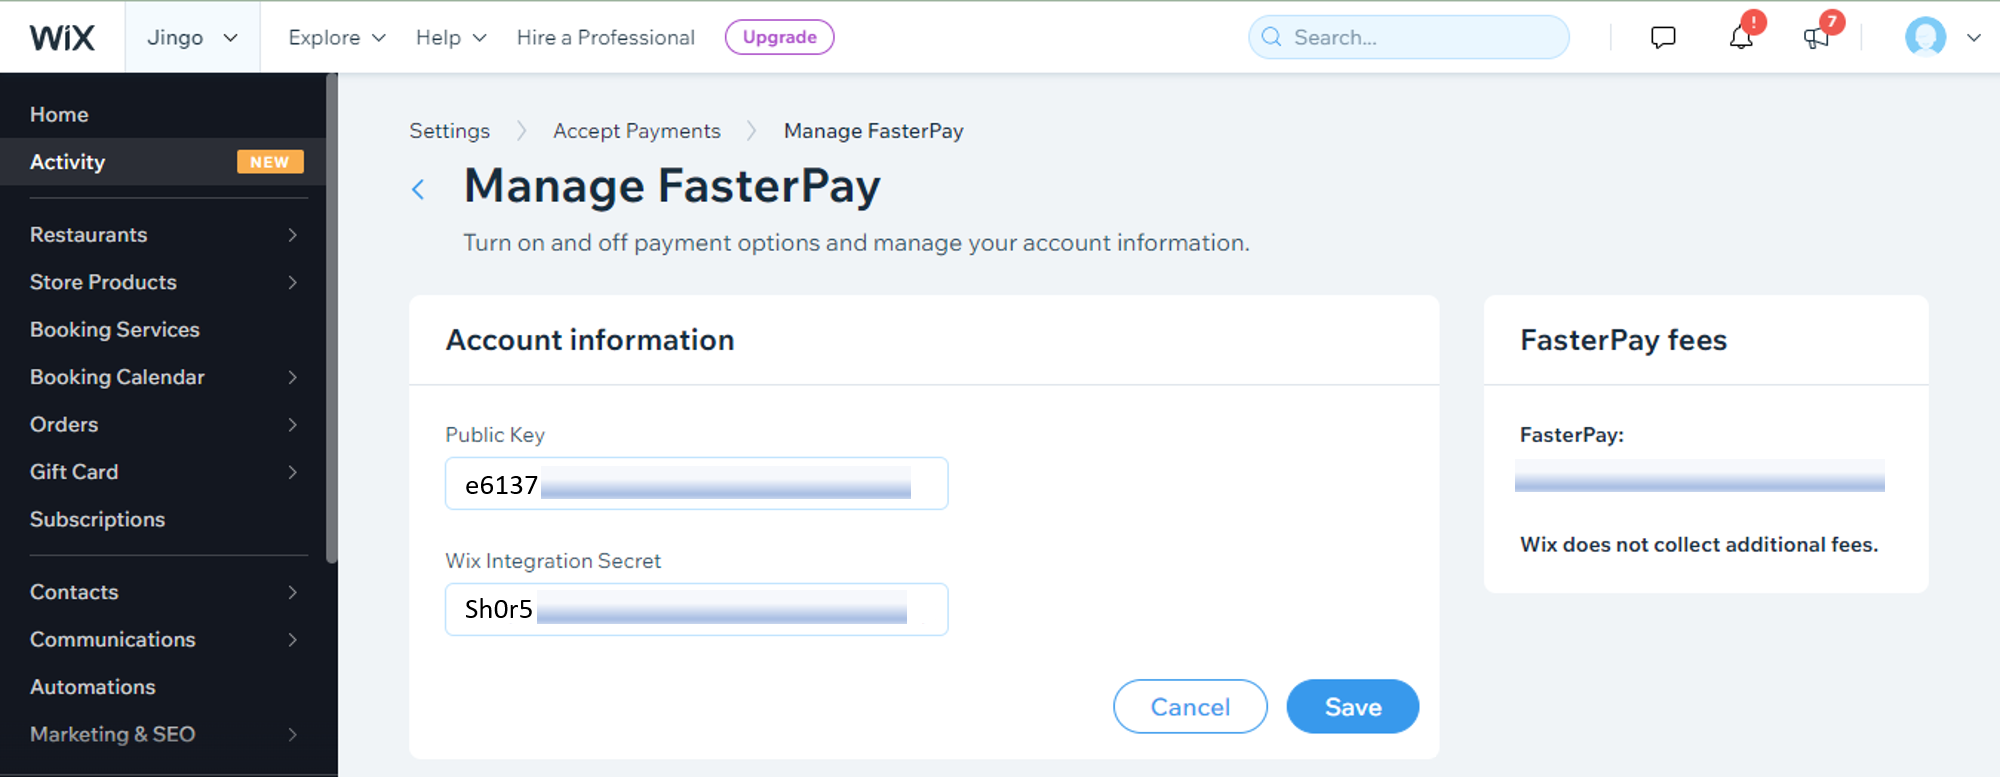 Configure FasterPay App